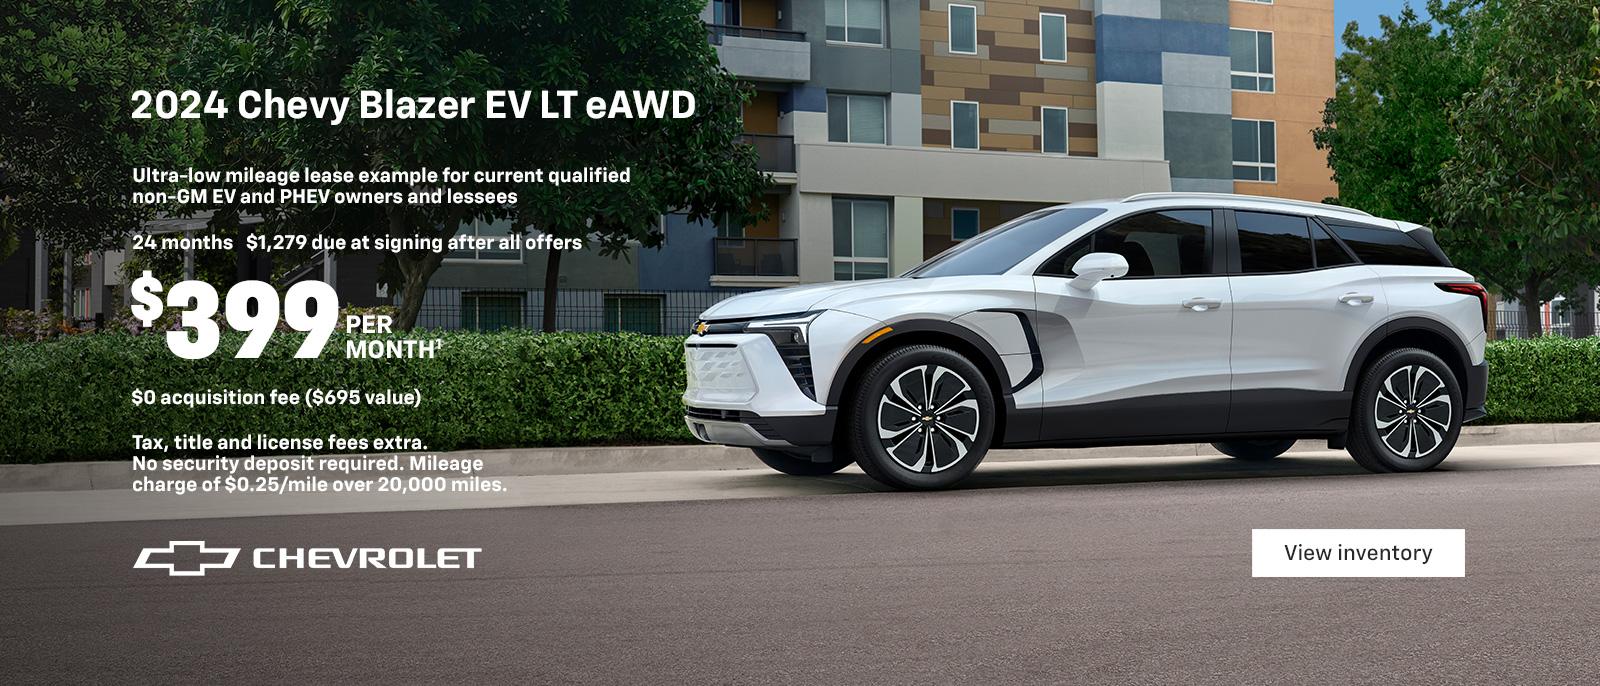 2024 Chevy Blazer EV LT eAWD. 2024 MotorTend SUV of the Year. The first-ever, all-electric Blazer EV. Ultra-low mileage lease example for current qualified Non-GM EV and PHEV Owners and Lessees. $399 per month. 24 months. $1,279 due at signing after all offers. $0 Acquisition fees ($695 value). Tax, title and license fees extra. No security deposit required. Mileage charge of $0.25/mile over 20,000 miles.